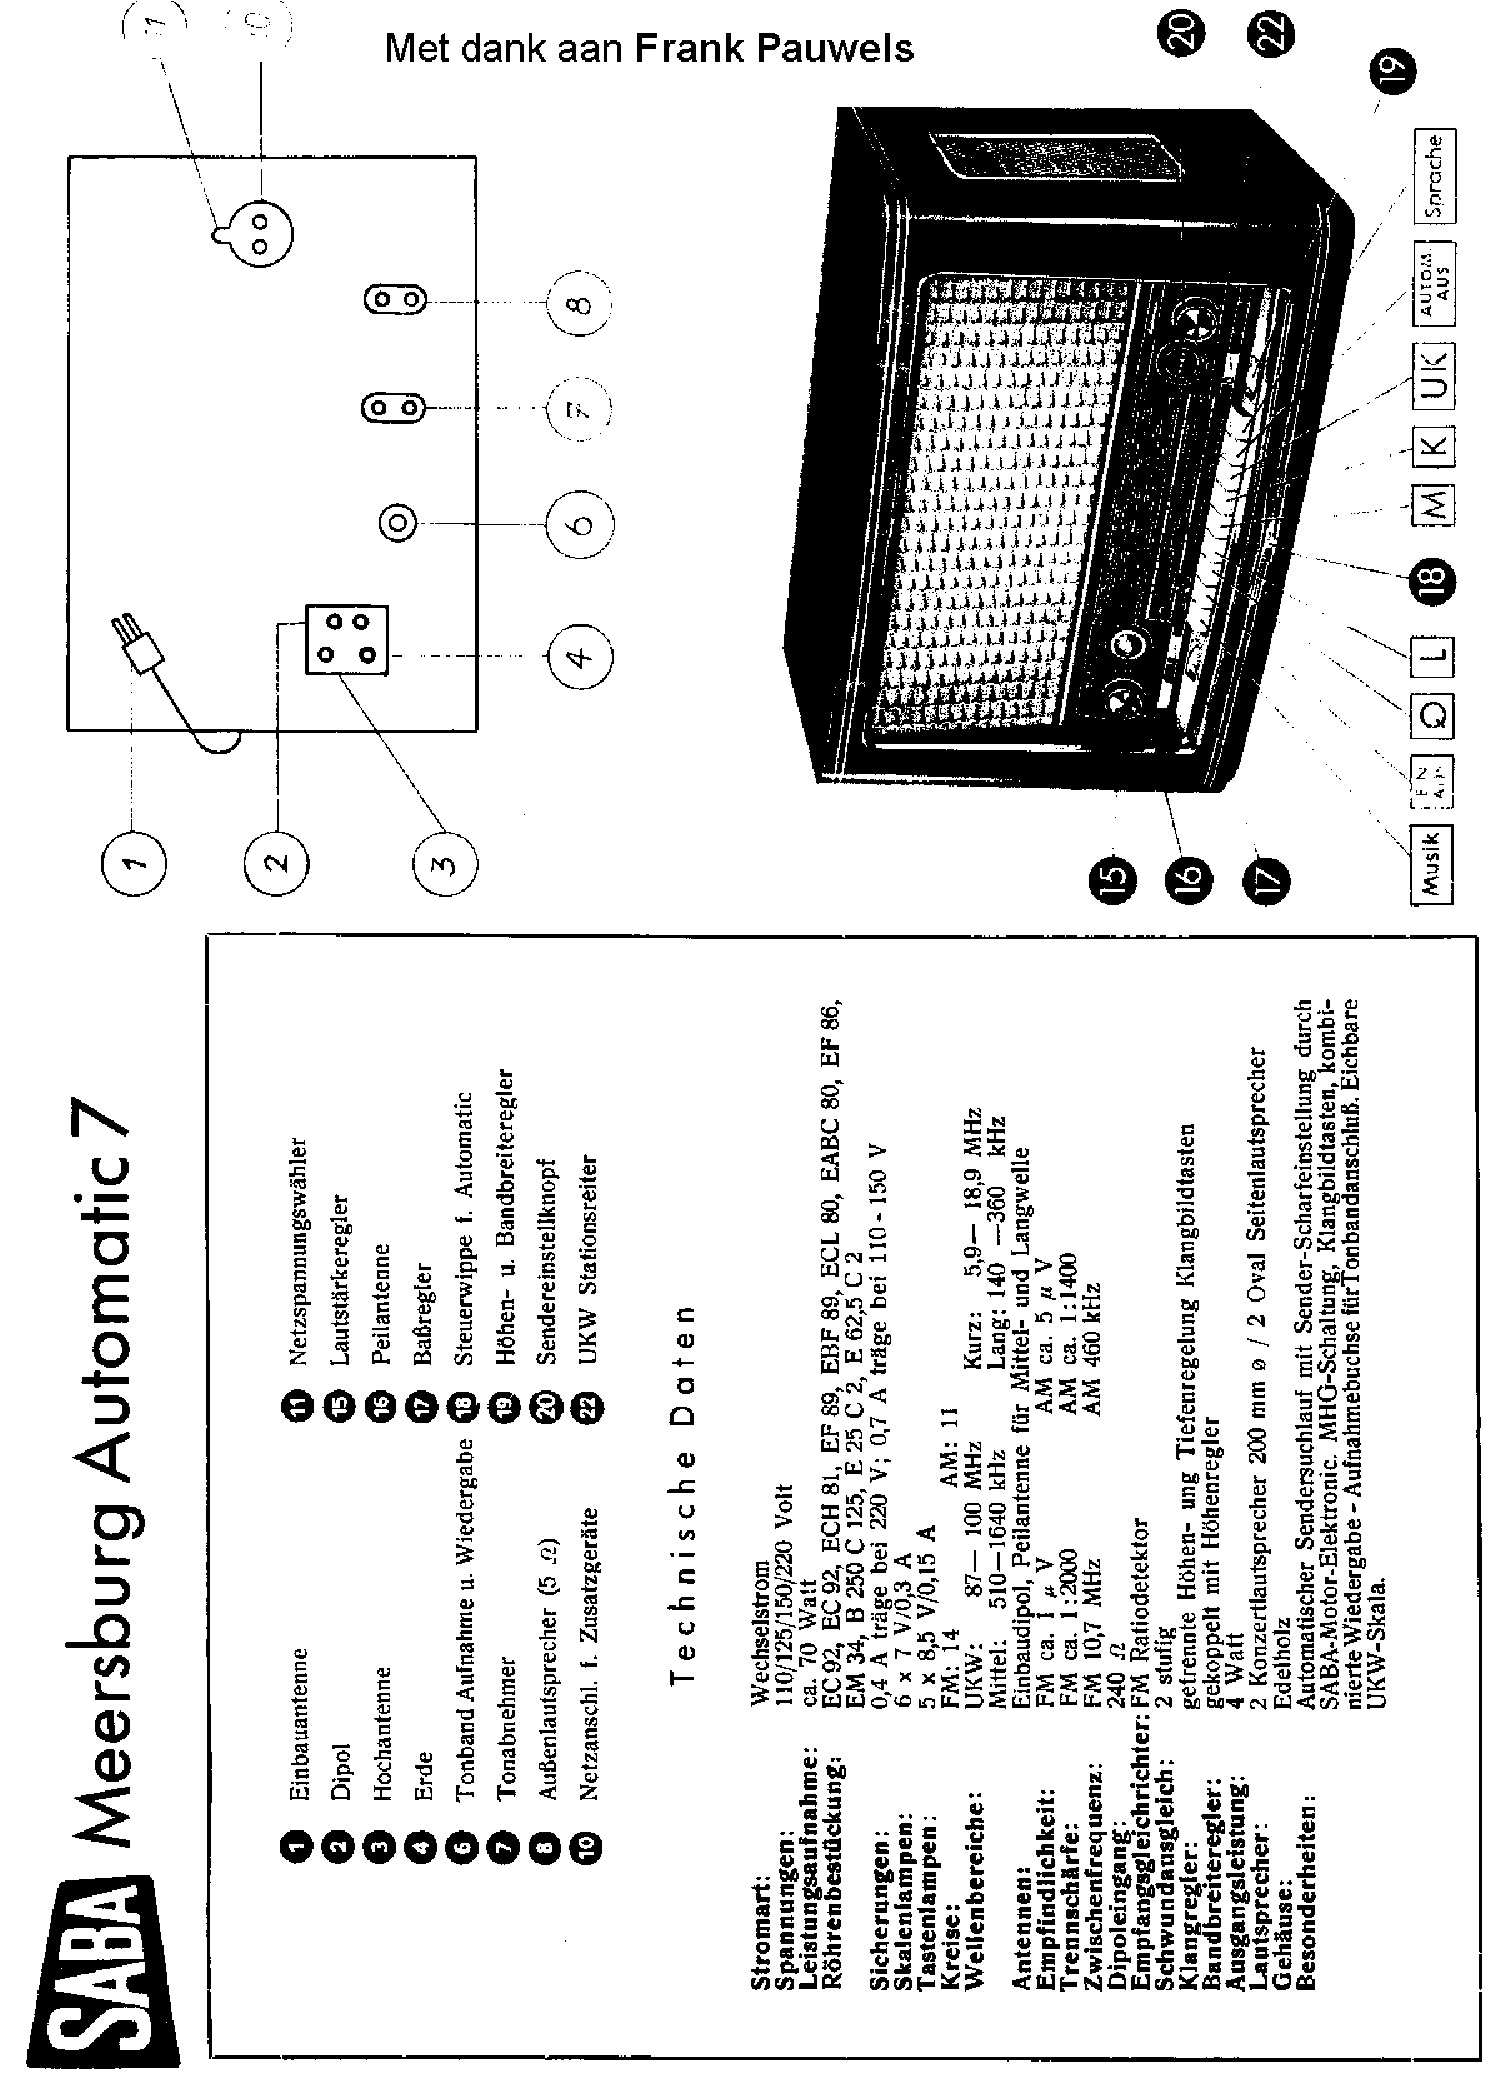 SABA MEERSBURG-AUTOMATIC-7 AM-FM RECEIVER SM service manual (1st page)